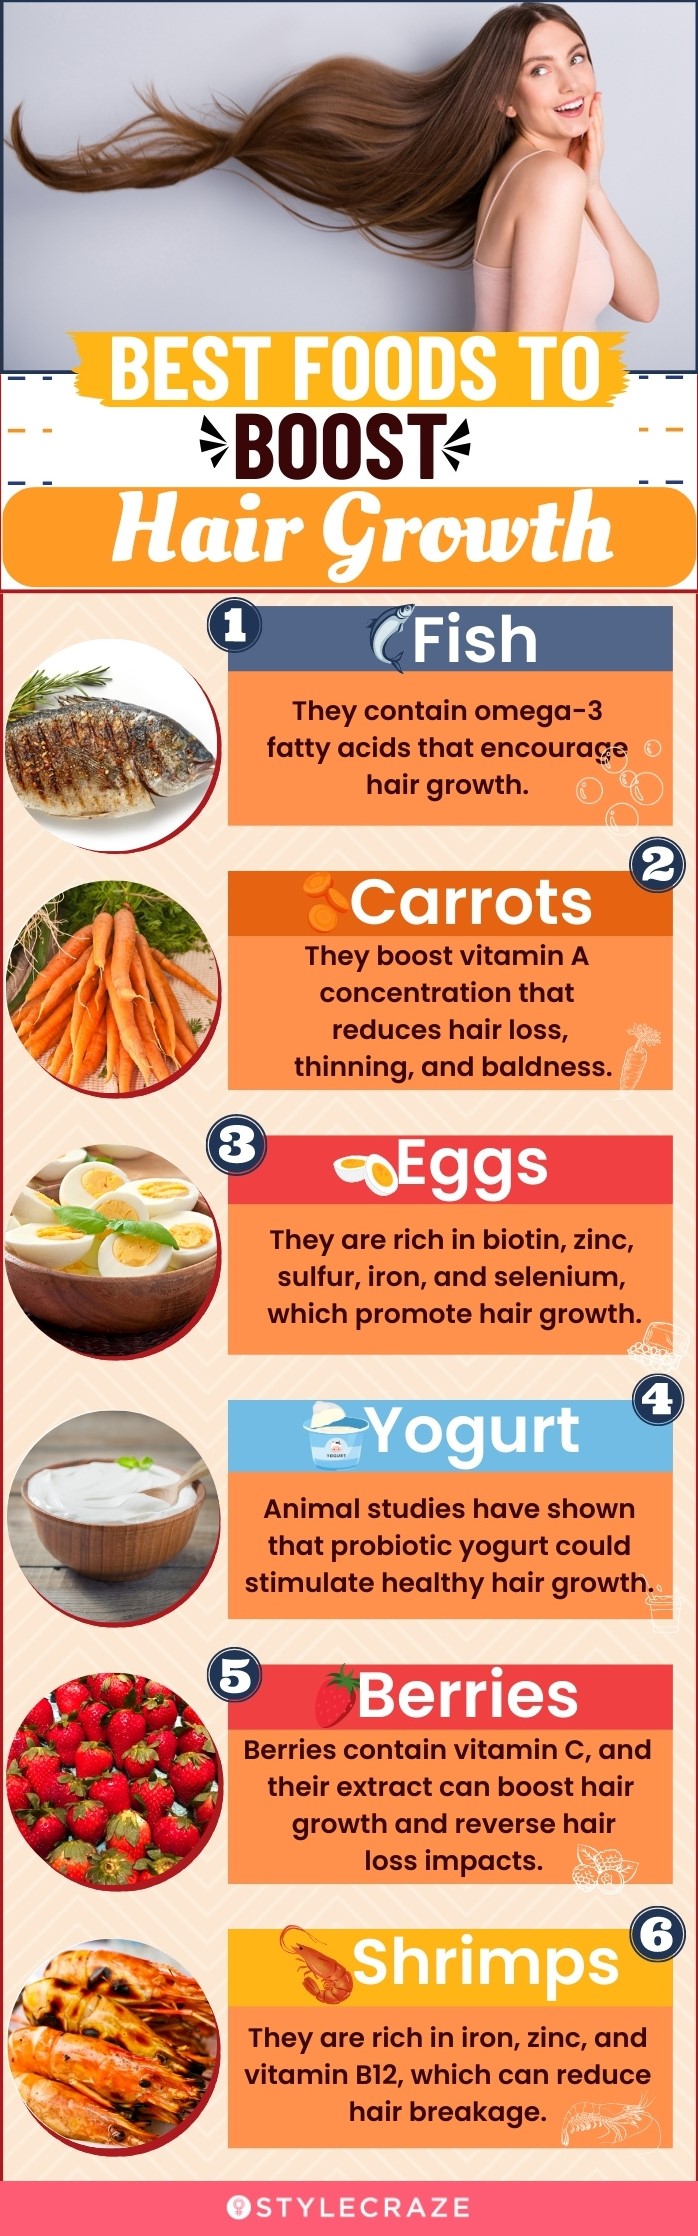 Diet For Hair Growth: 11 Foods To Help Your Hair Grow Back